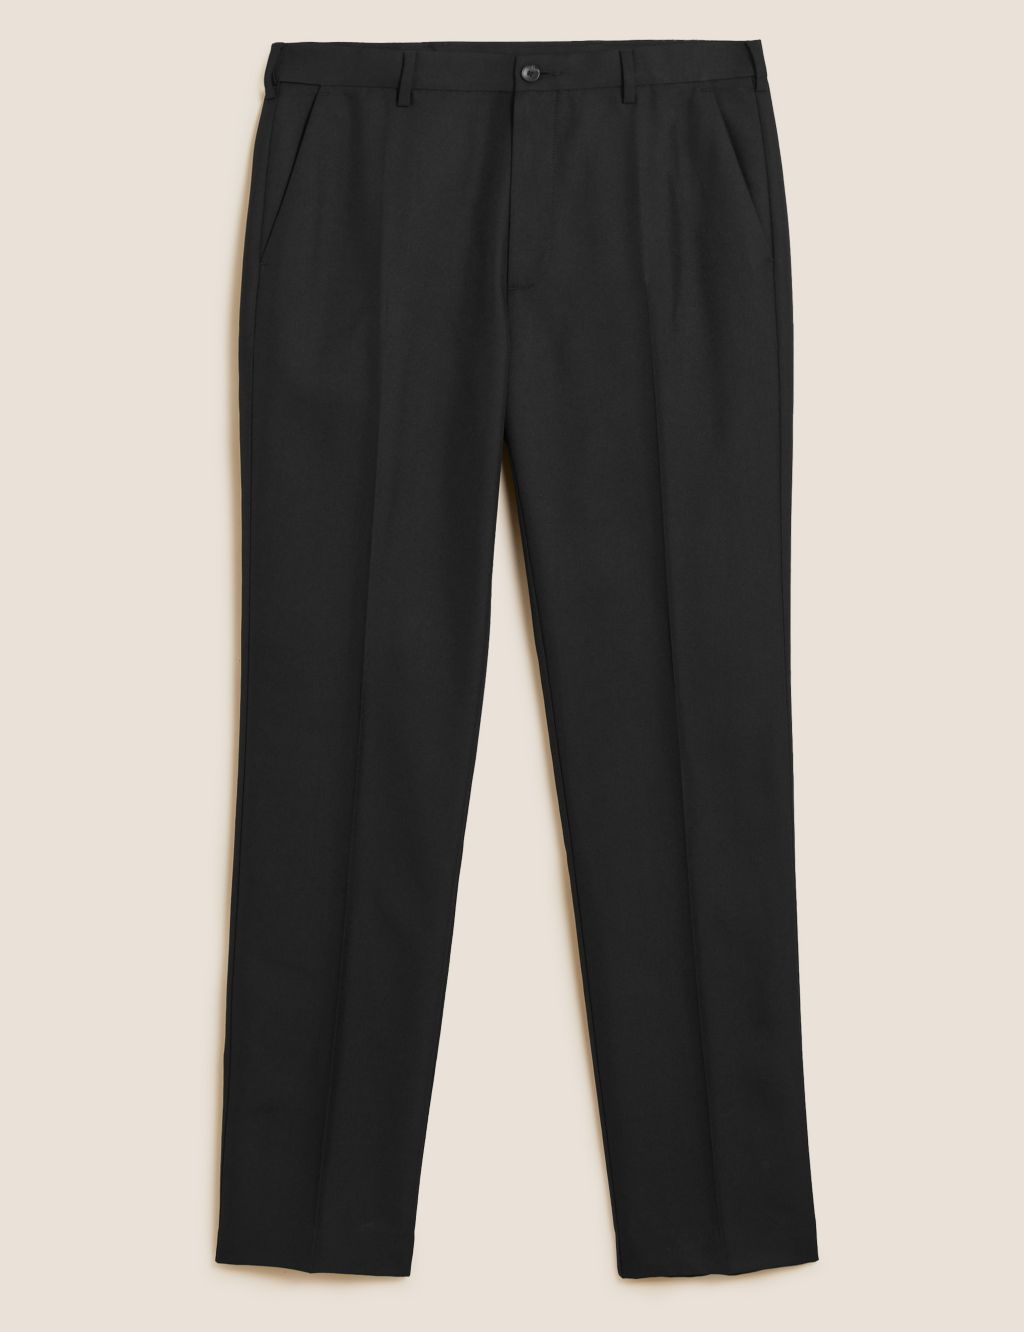 Big & Tall Regular Fit Trousers with Active Waist image 3